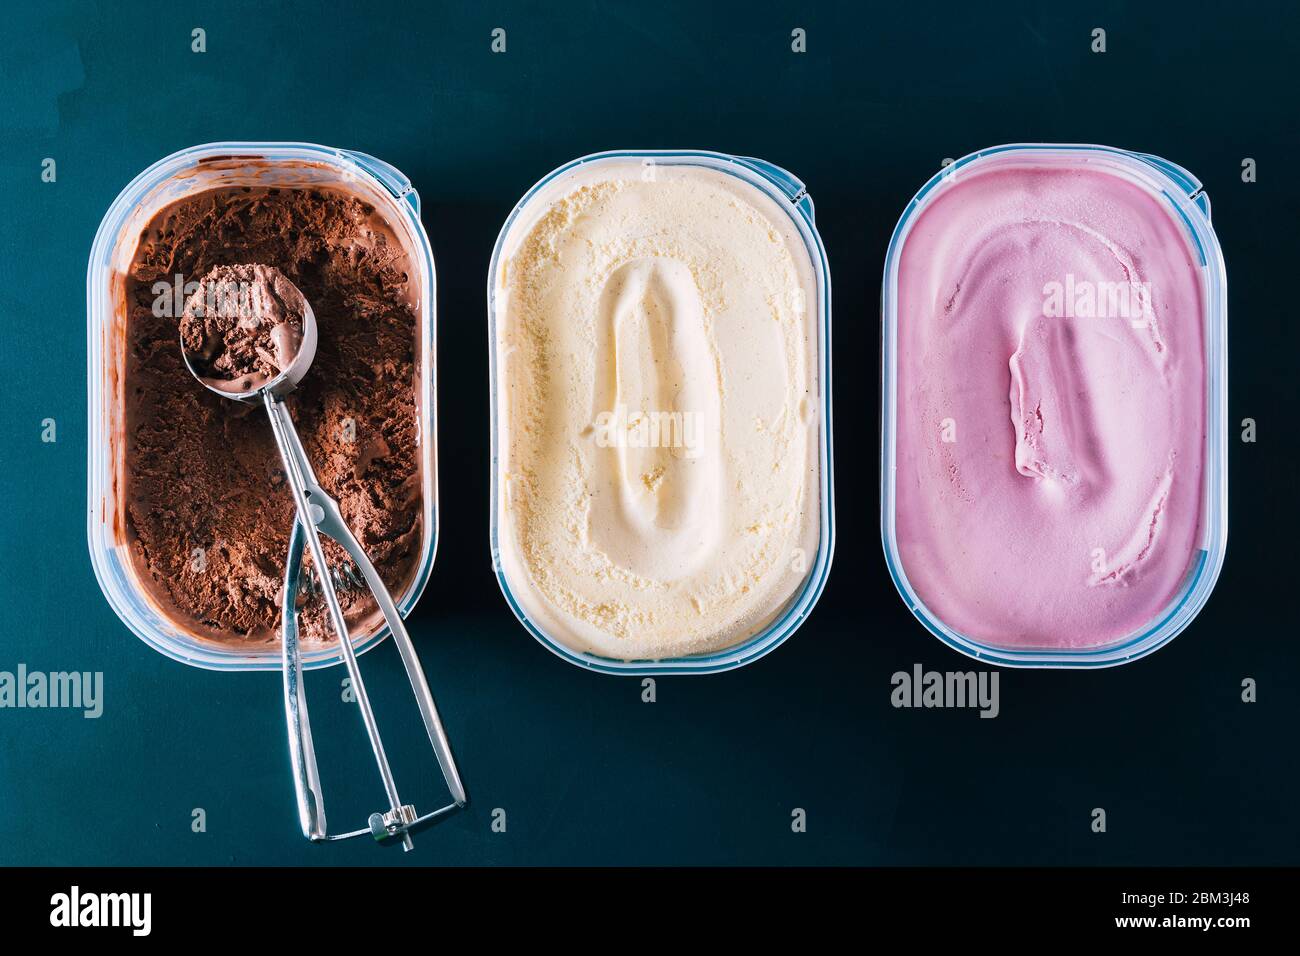 Chocolate, vanilla and strawberry ice cream tubs. To prepare Neapolitan ice cream ready to eat on a hot summer day or as a delicious dessert. Stock Photo